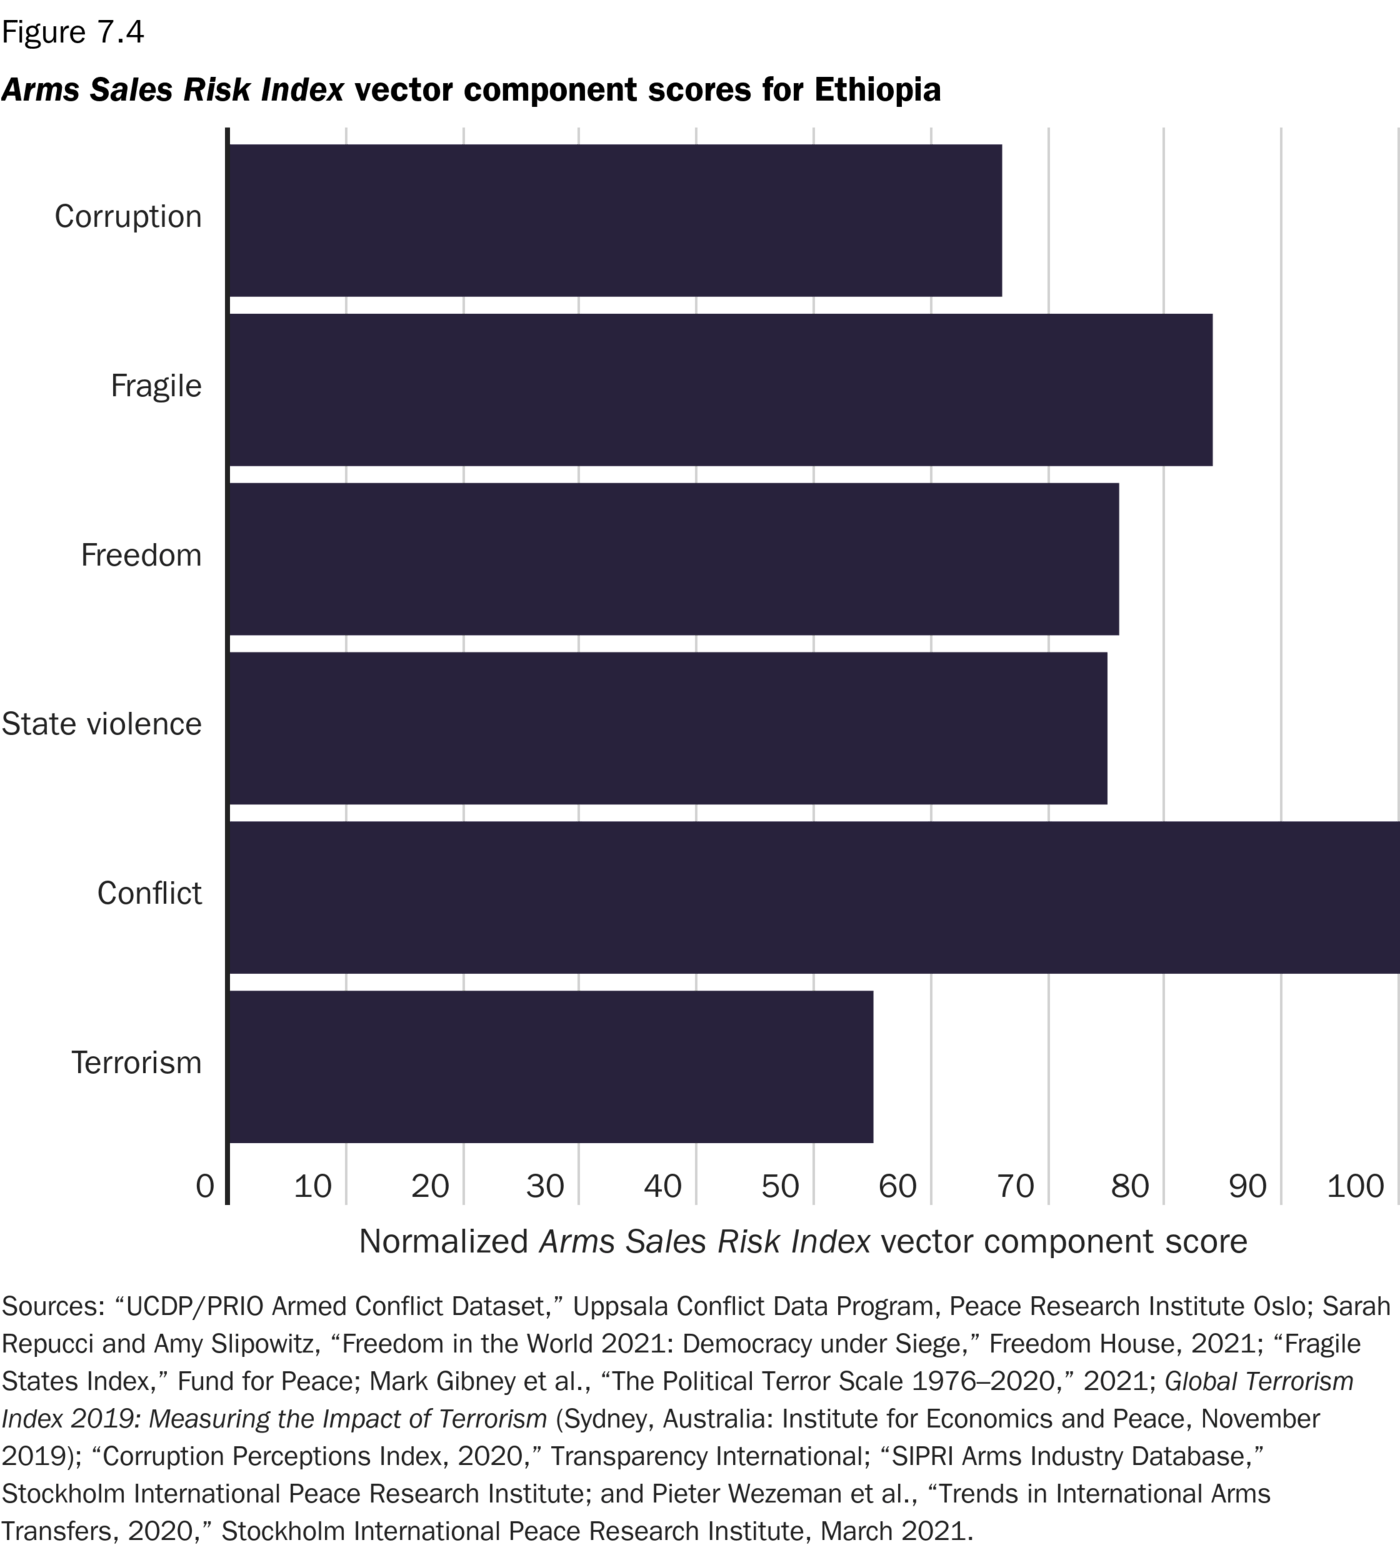 Arms Sales Risk Index vector component scores for Ethiopia